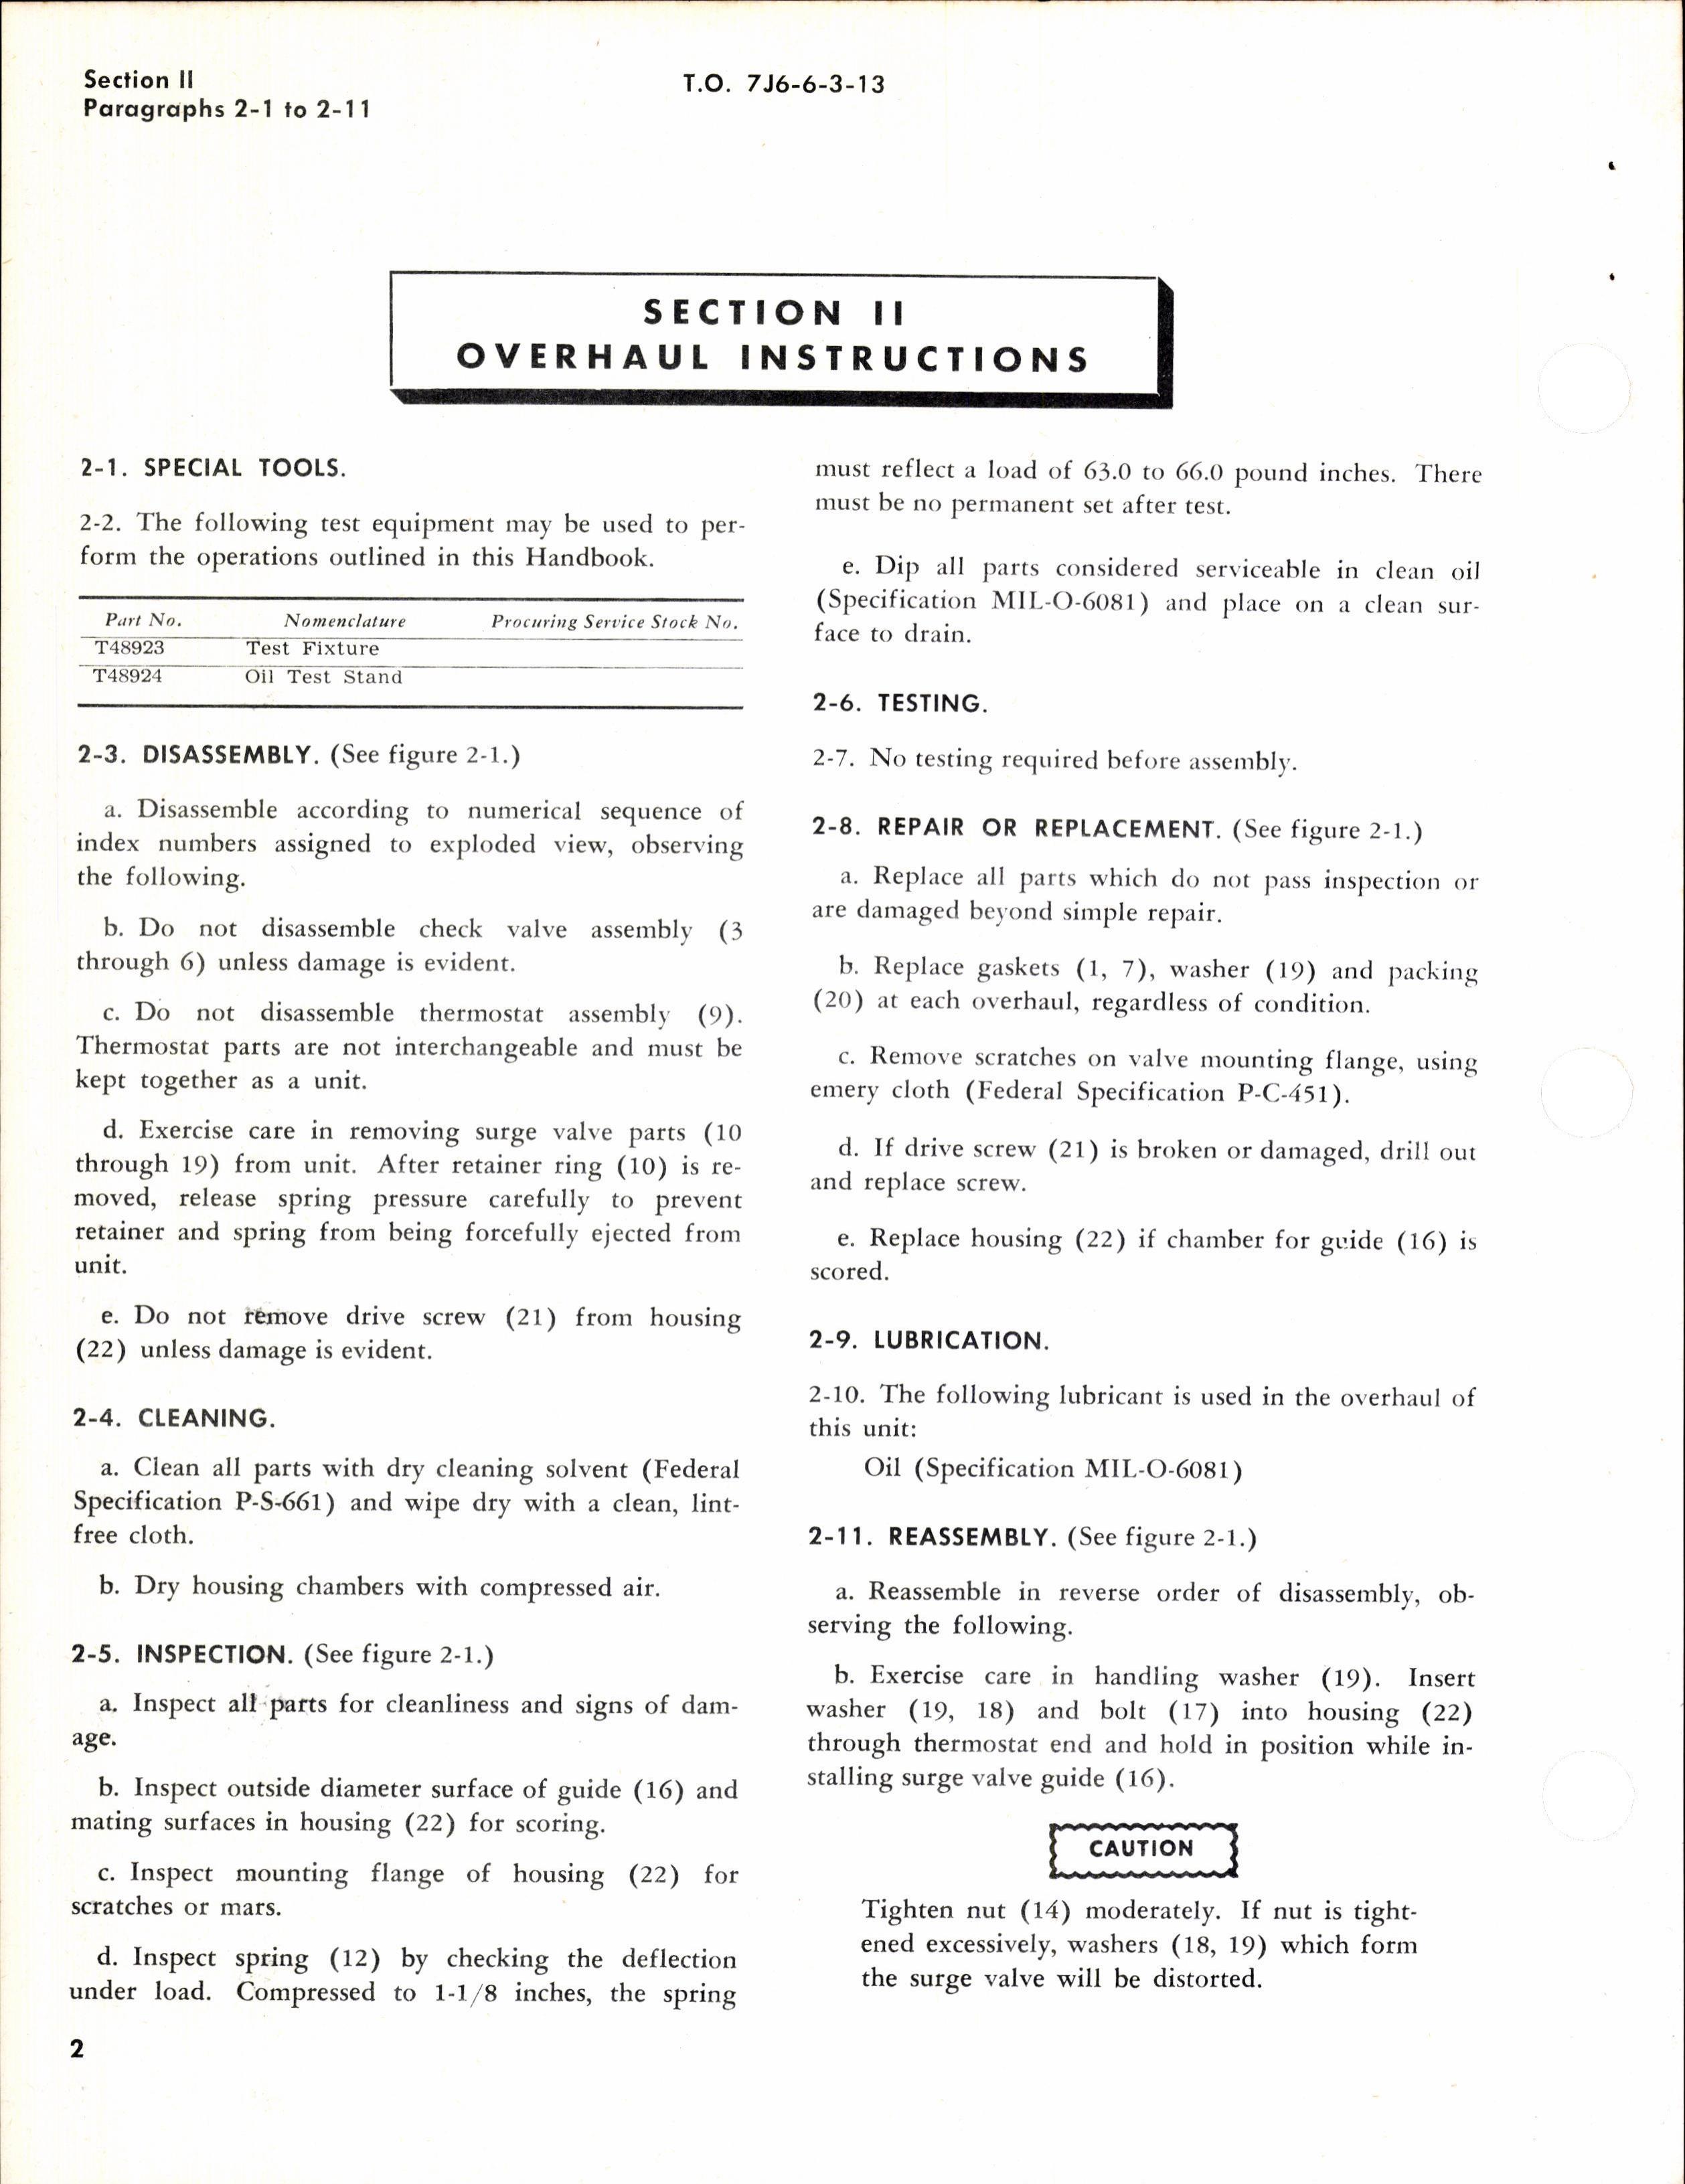 Sample page 4 from AirCorps Library document: Overhaul Instructions for Thermostatic Temperature Control Valves 